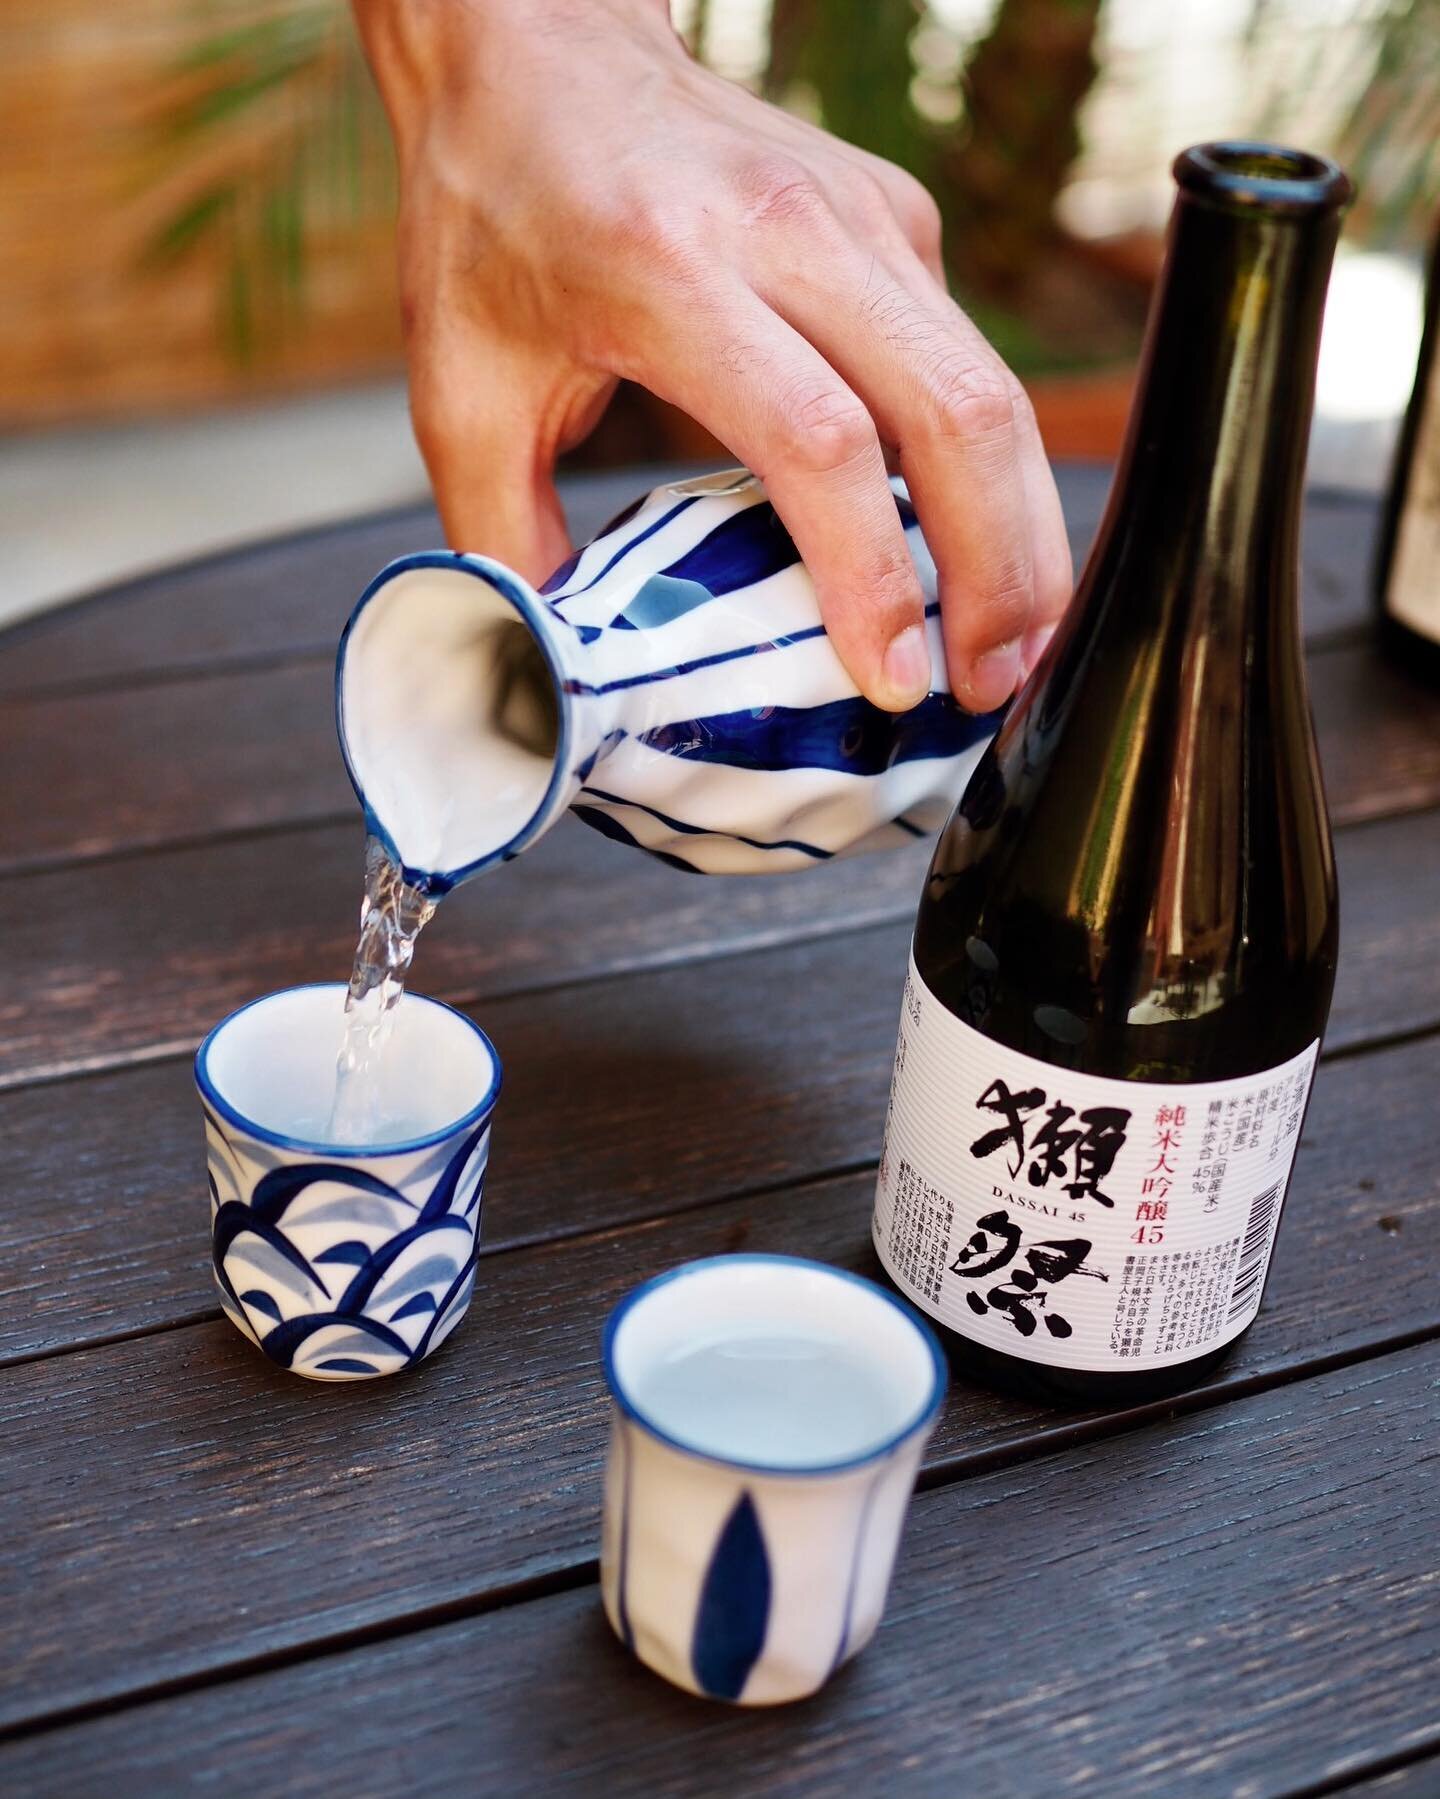 Dassai Junmai Dai-Ginjo - This sake is known for its high quality while tasting smooth and fruity. Whether you enjoy drinking sake or it&rsquo;s your first time trying it, Dassai makes for a good choice that is easy to drink.

We have a variety of sa